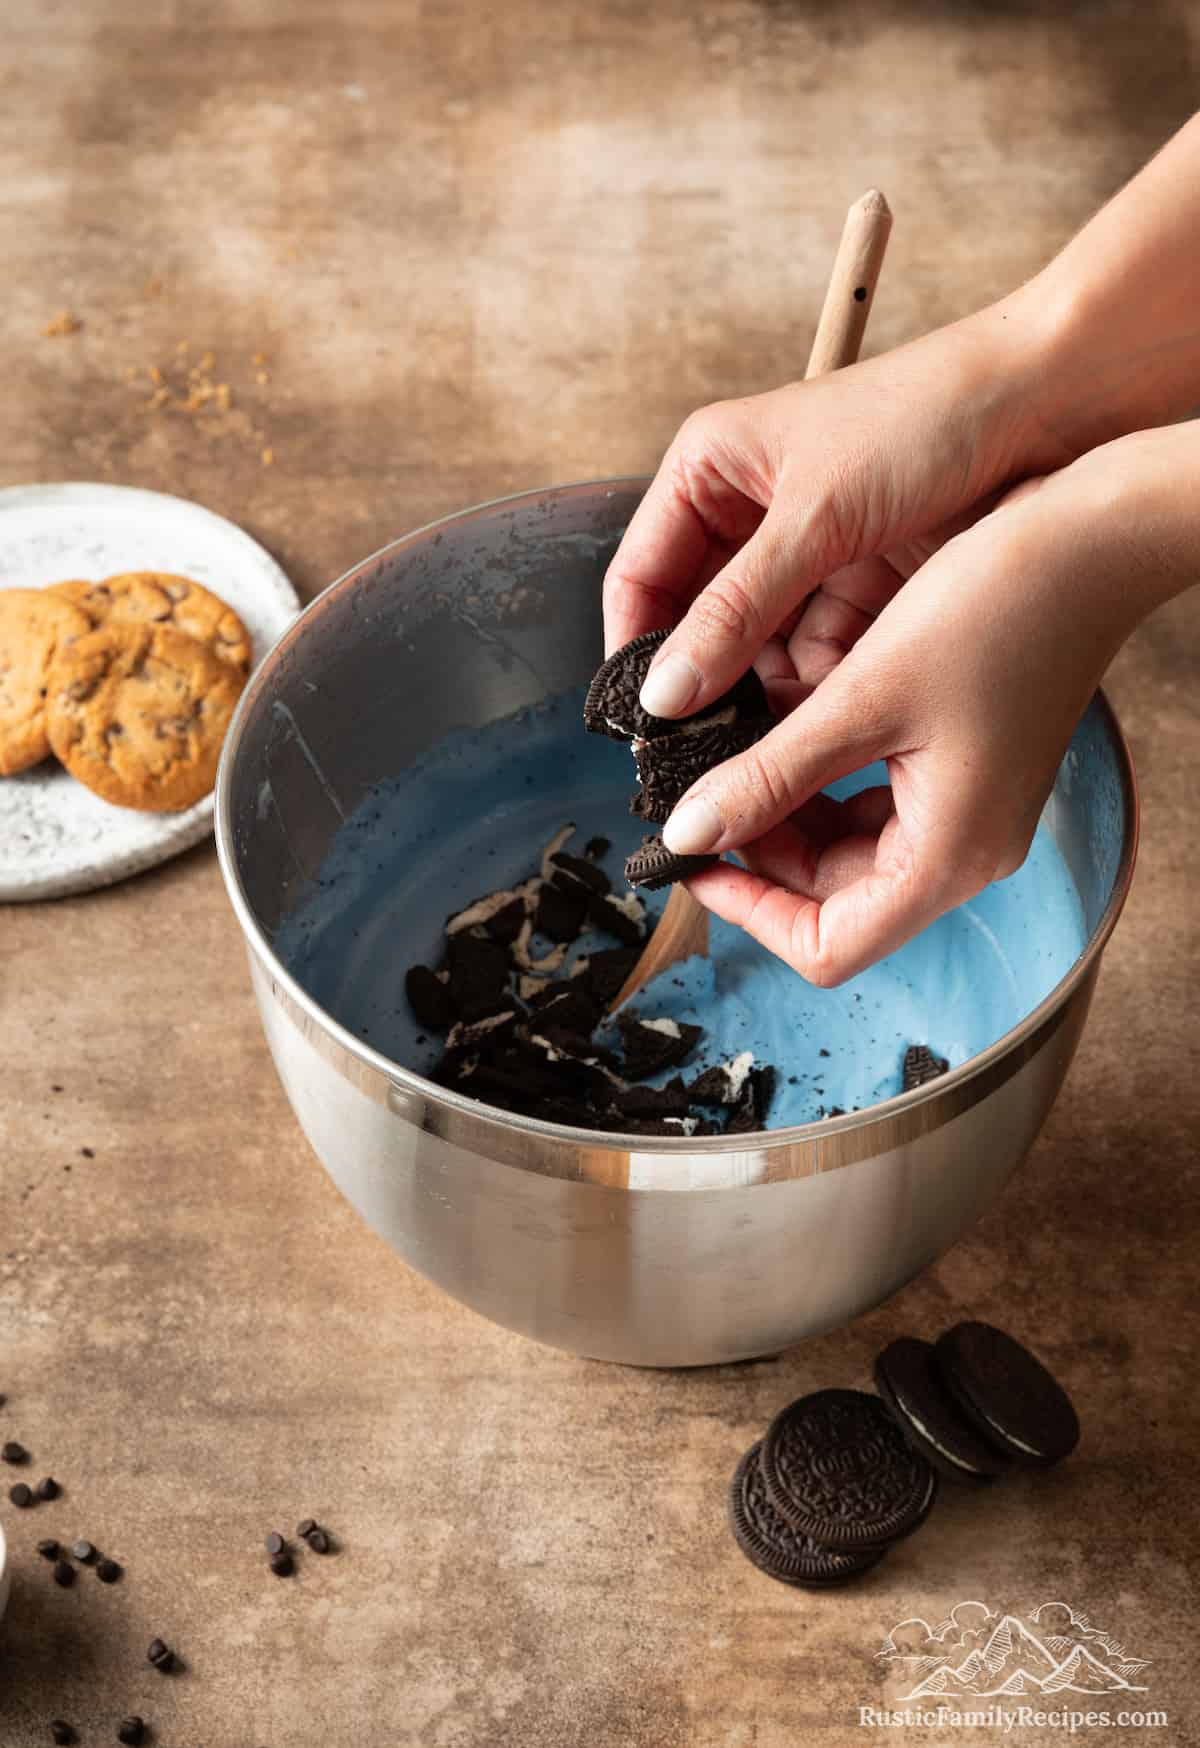 A hand crumbles Oreo cookies into a bowl of blue ice cream.